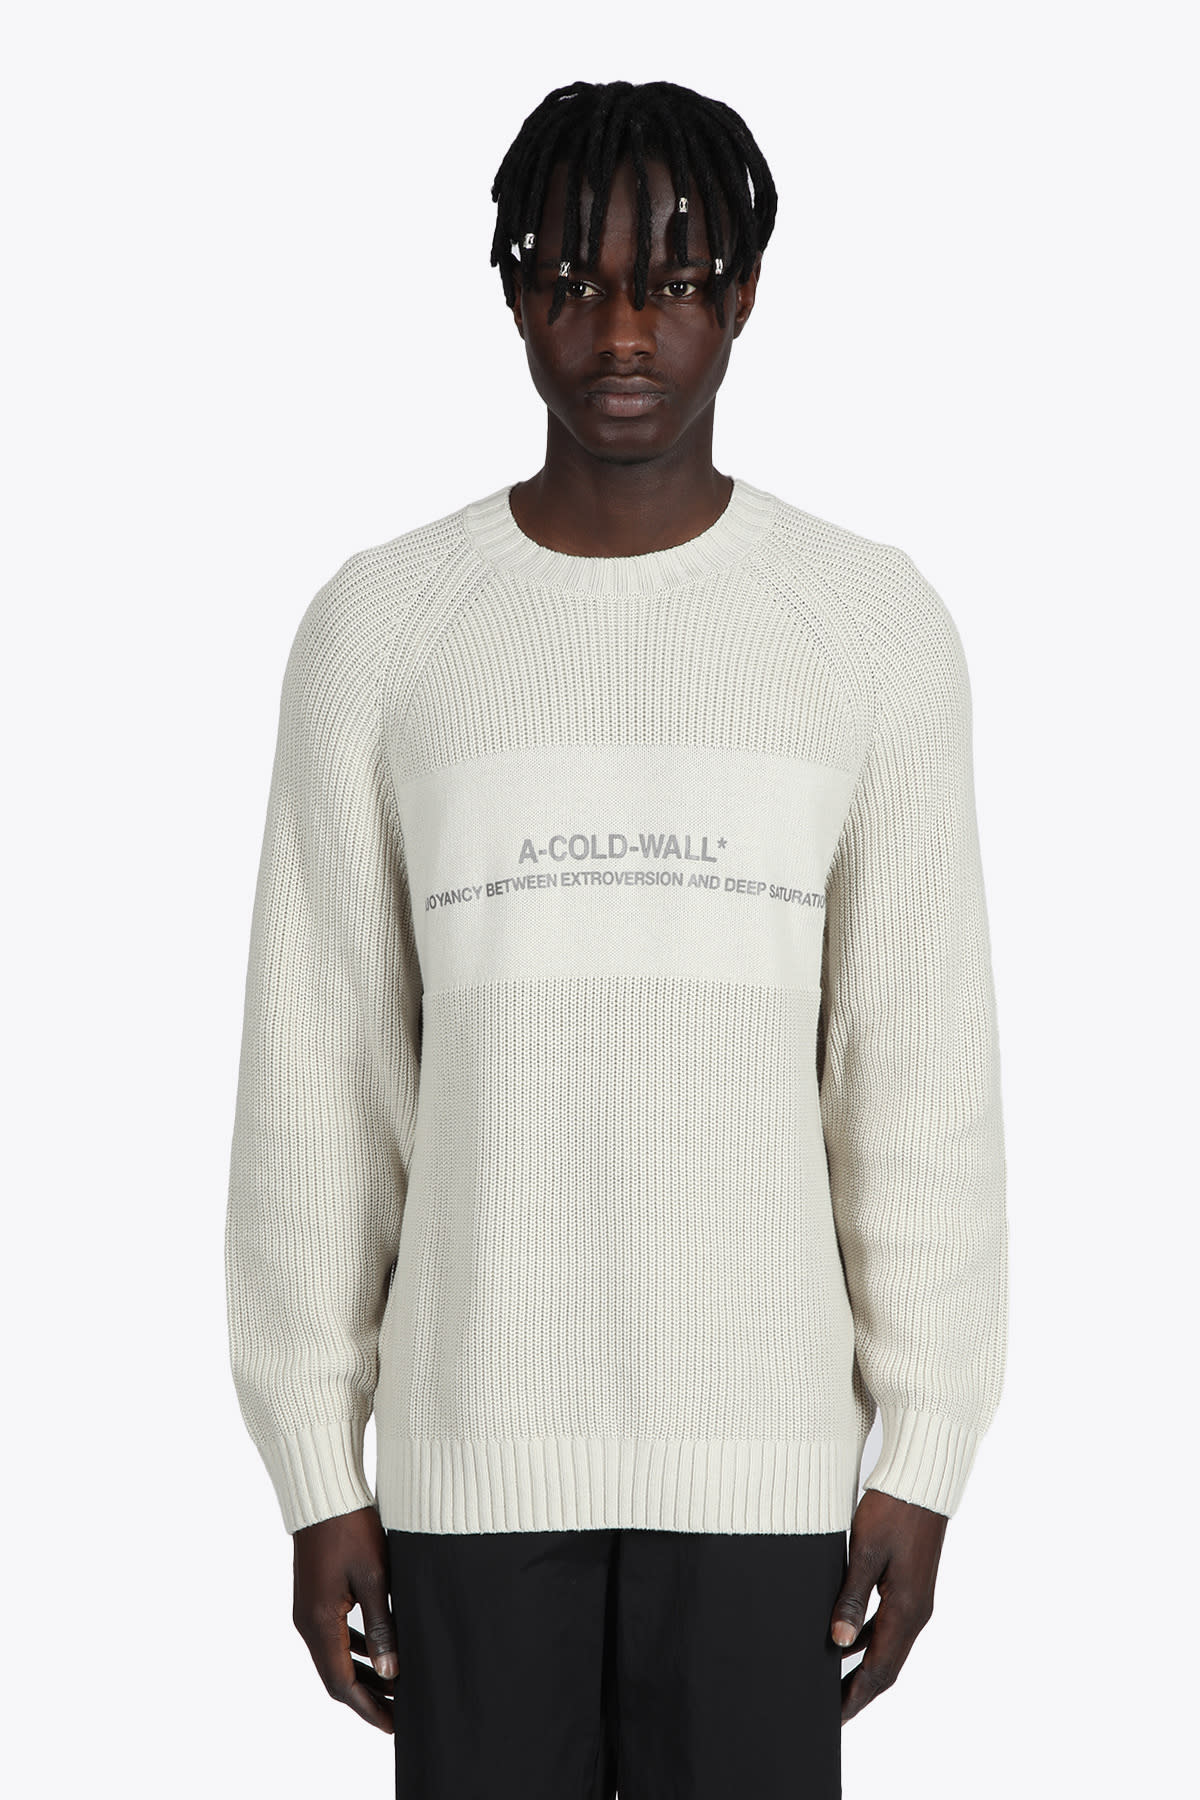 A-COLD-WALL Knitted Dialogue Knit Light beige cotton knit pullover with logo